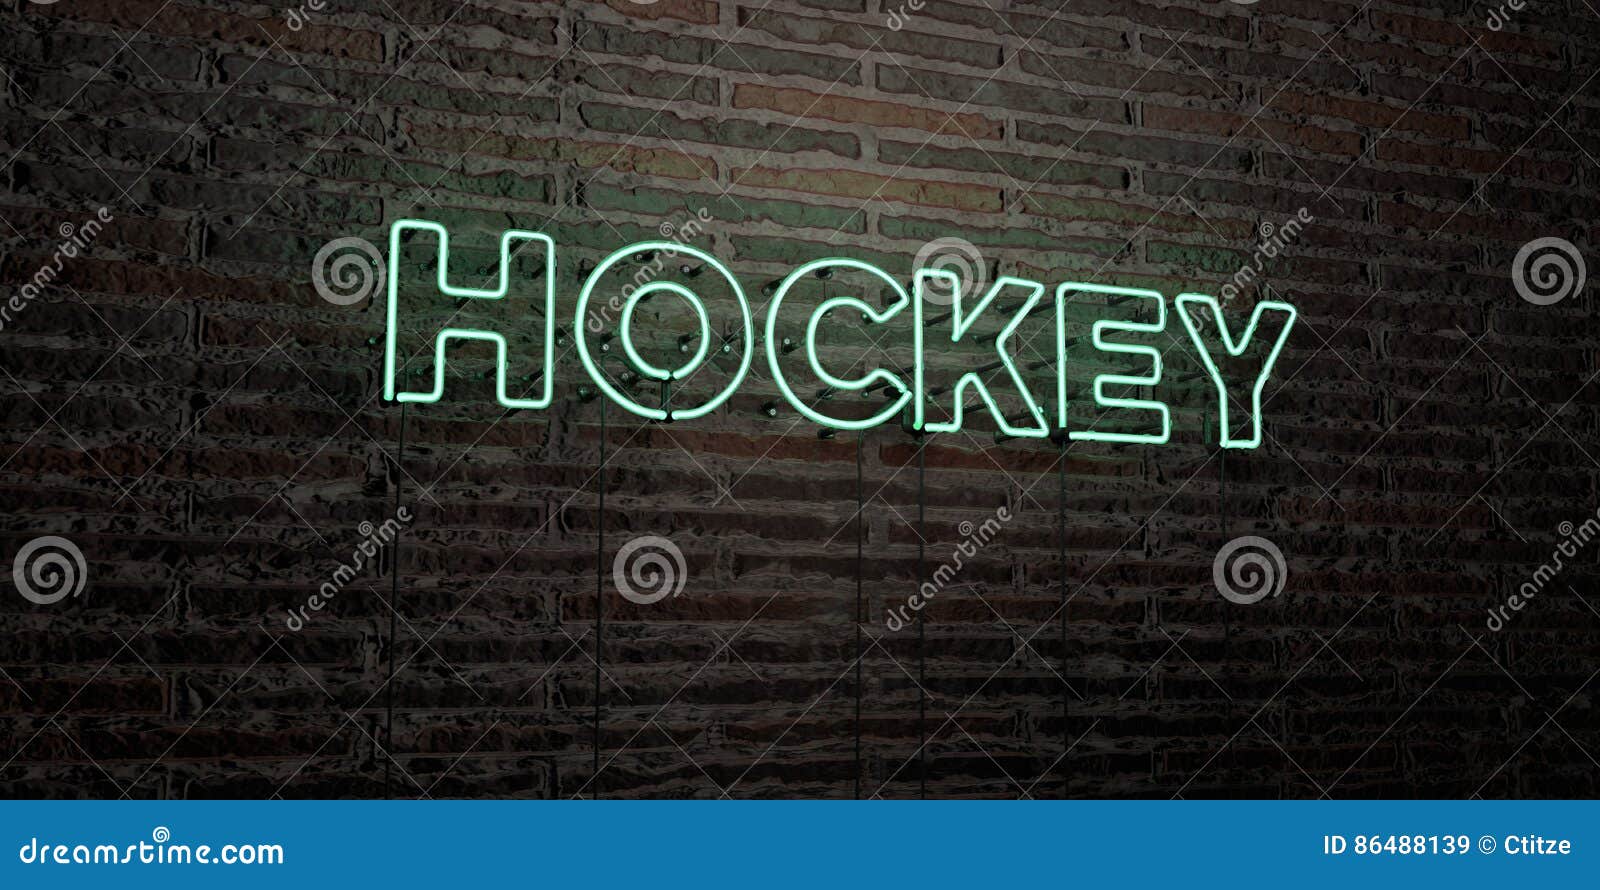 HOCKEY -Realistic Neon Sign on Brick Wall Background - 3D Rendered Royalty Free Stock Image Stock Illustration